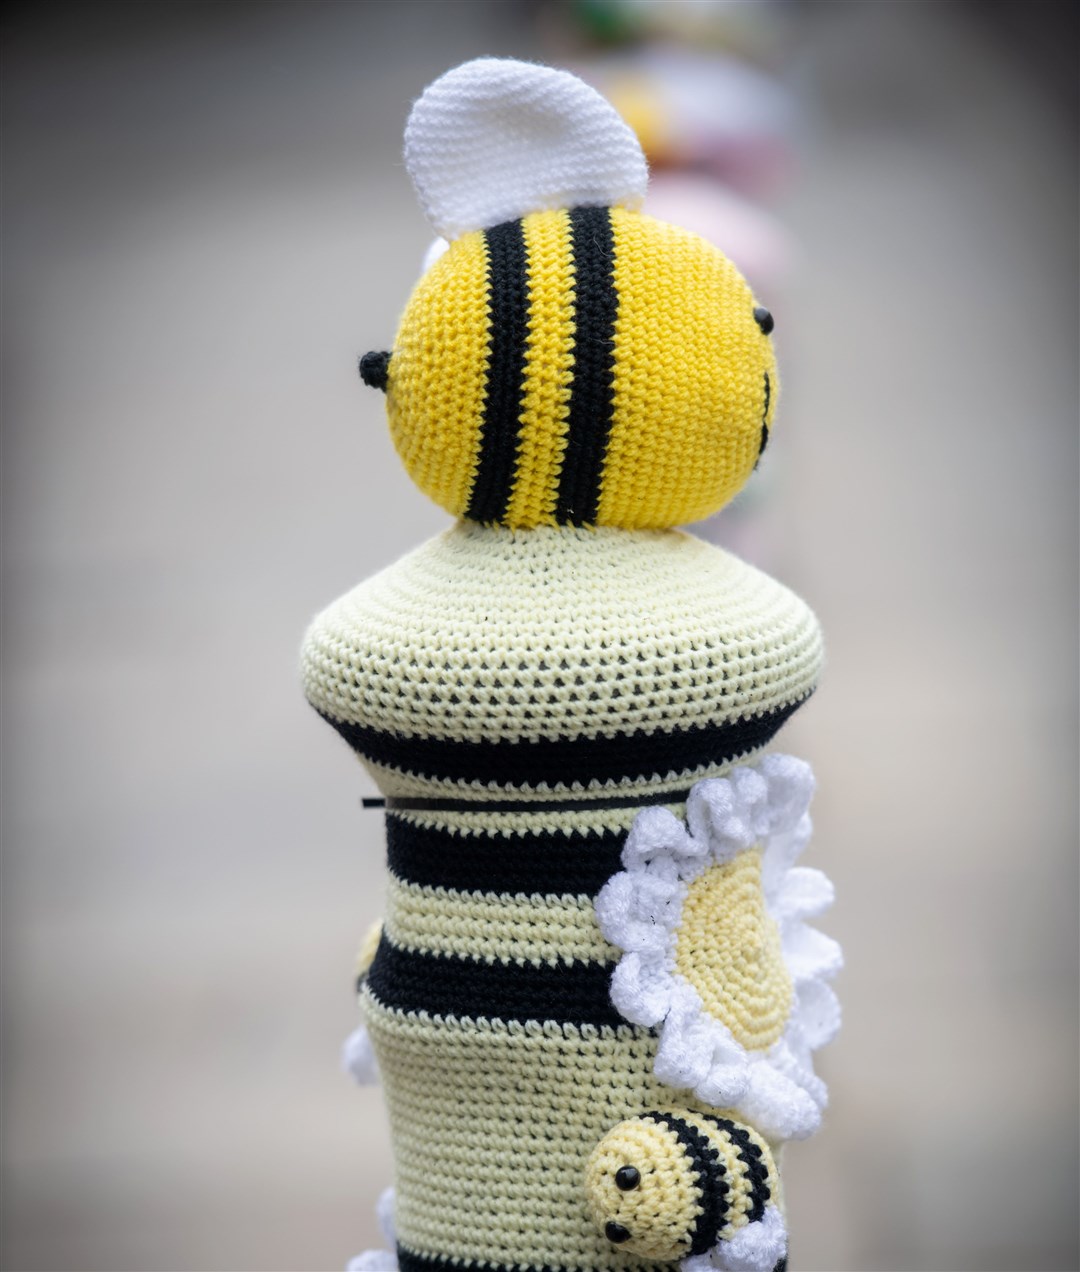 Easter-themed yarn-bombing on Dingwall High Street. Picture: Picture: Callum Mackay.